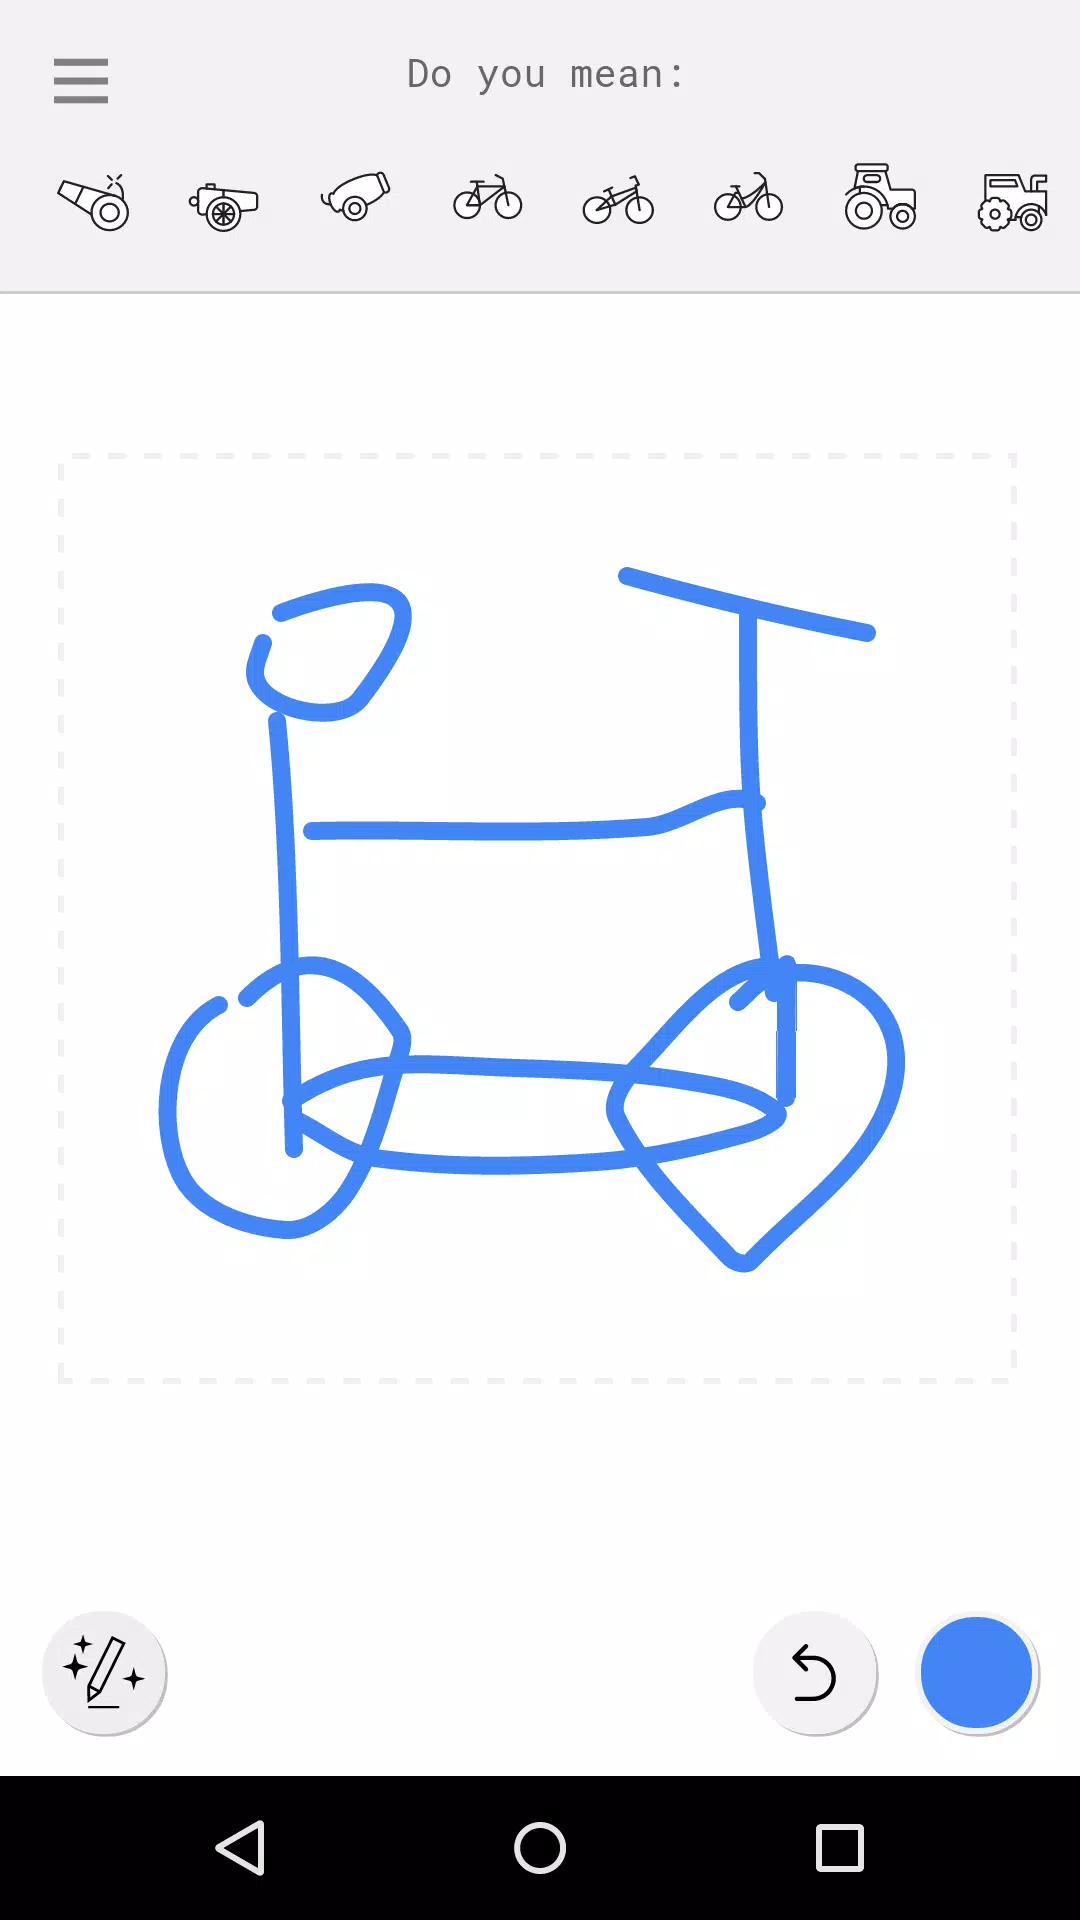 Auto Draw - draw online APK (Android App) - Free Download